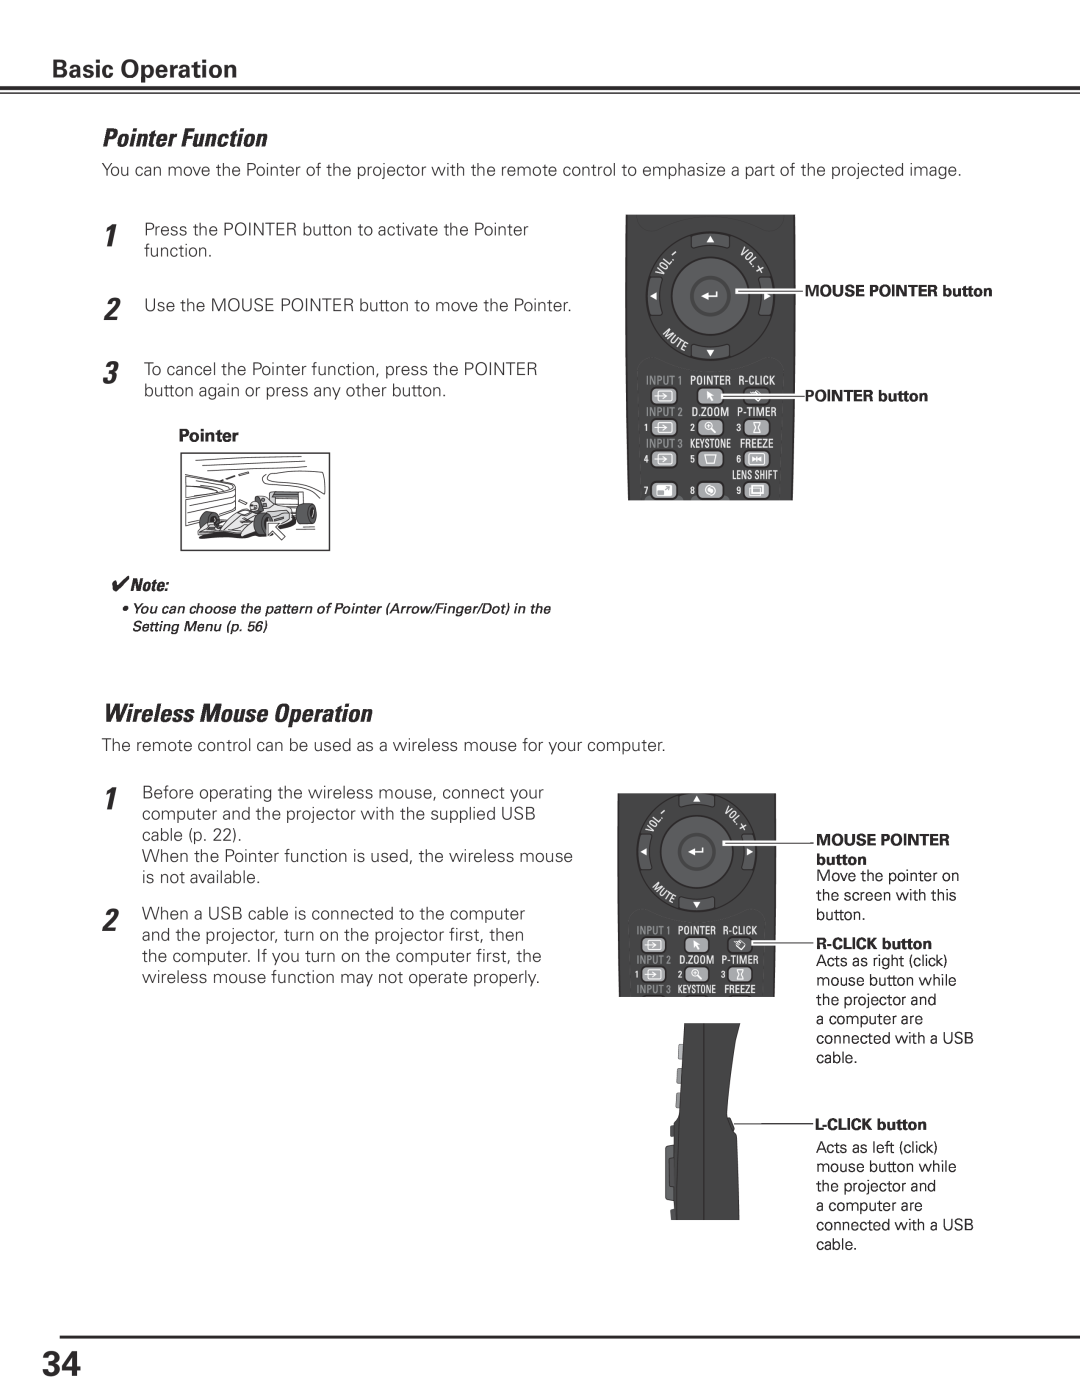 Sanyo PLC-XP200L owner manual Pointer Function, Wireless Mouse Operation, Basic Operation 